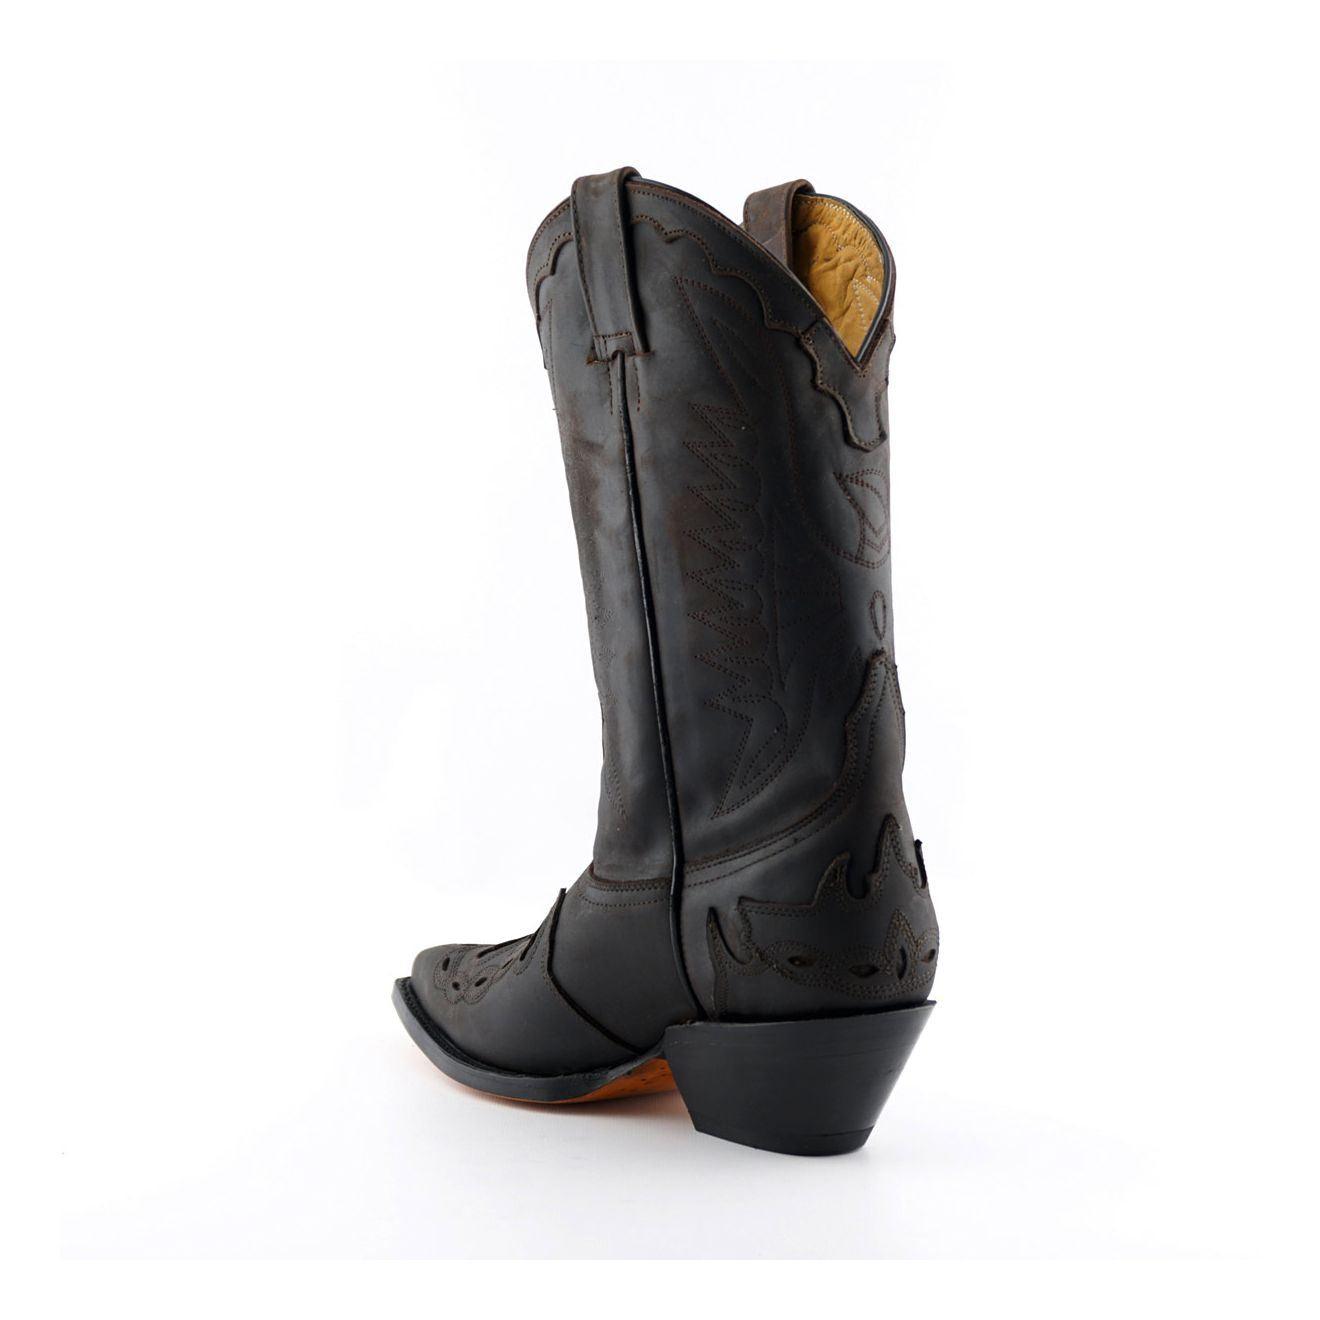 Grinders Unisex Brown Leather Cowboy Boots-Arizona HI - Upperclass Fashions 